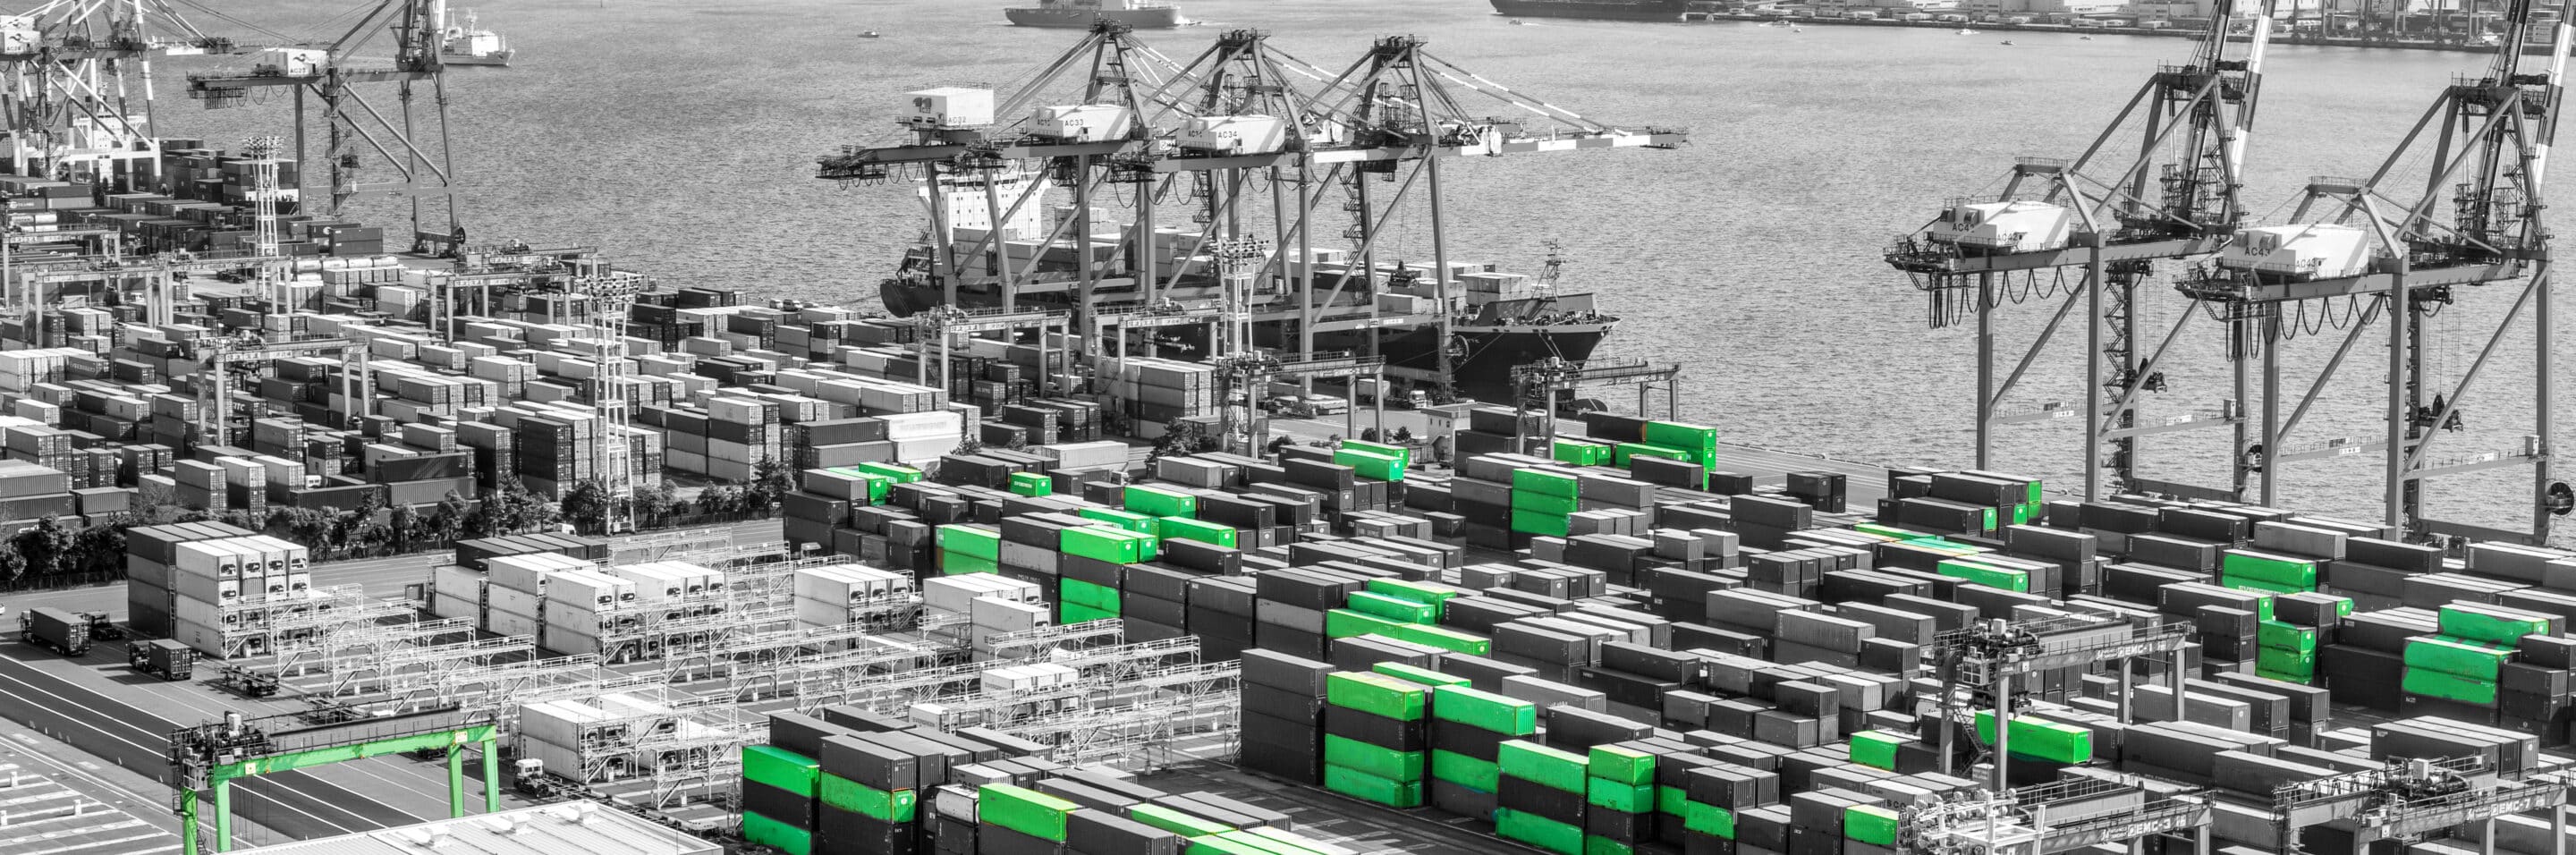 Transloading Services - Ward Logistics: port with containers by the hundreds